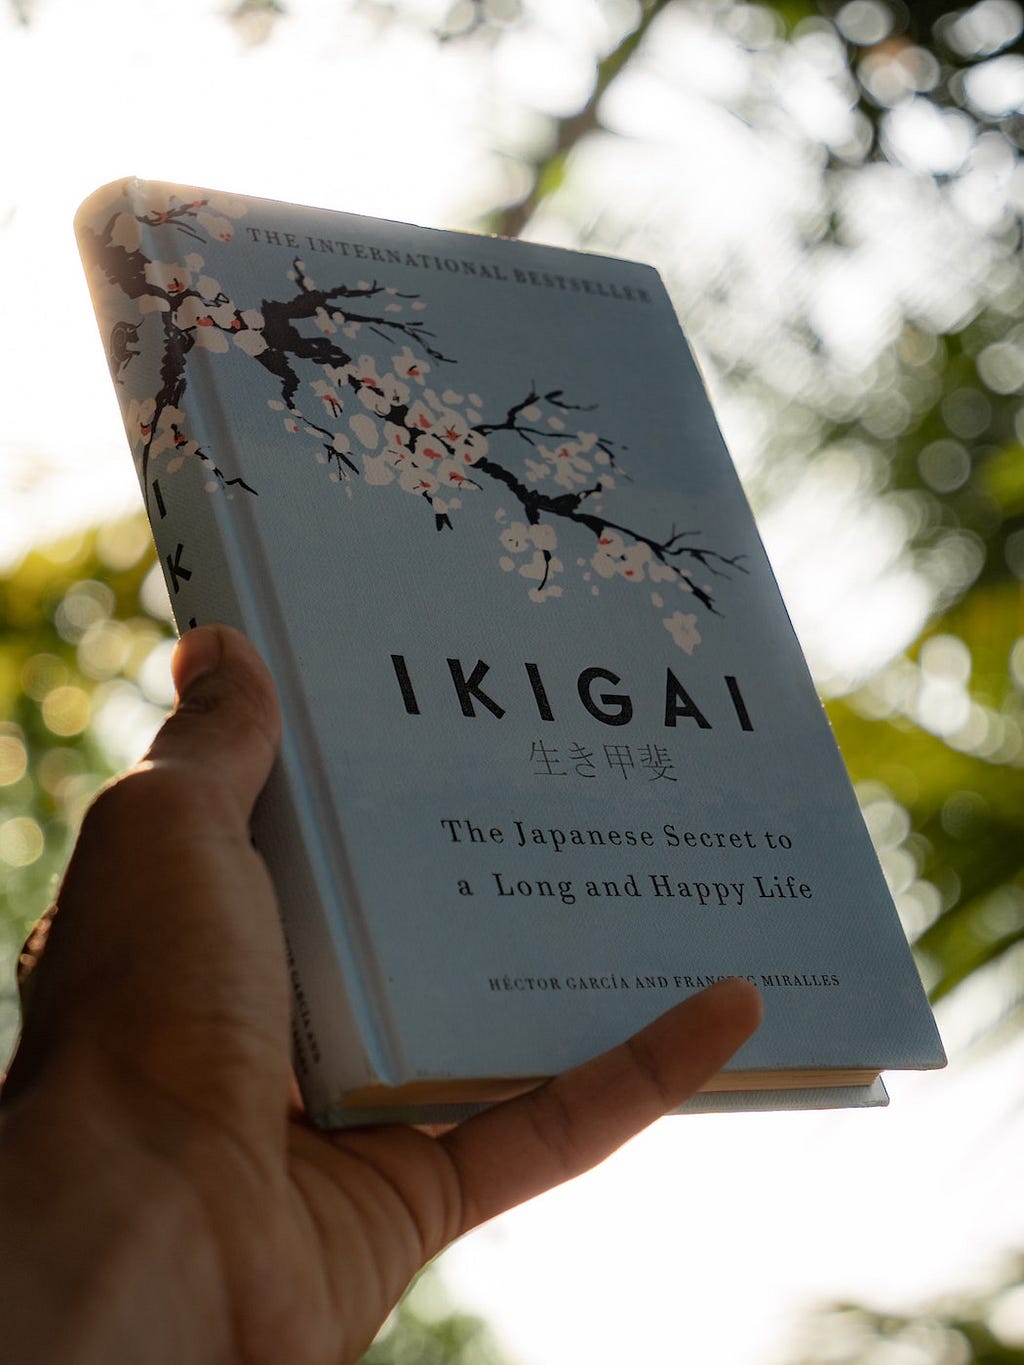 Book about Japanese concept of ikigai